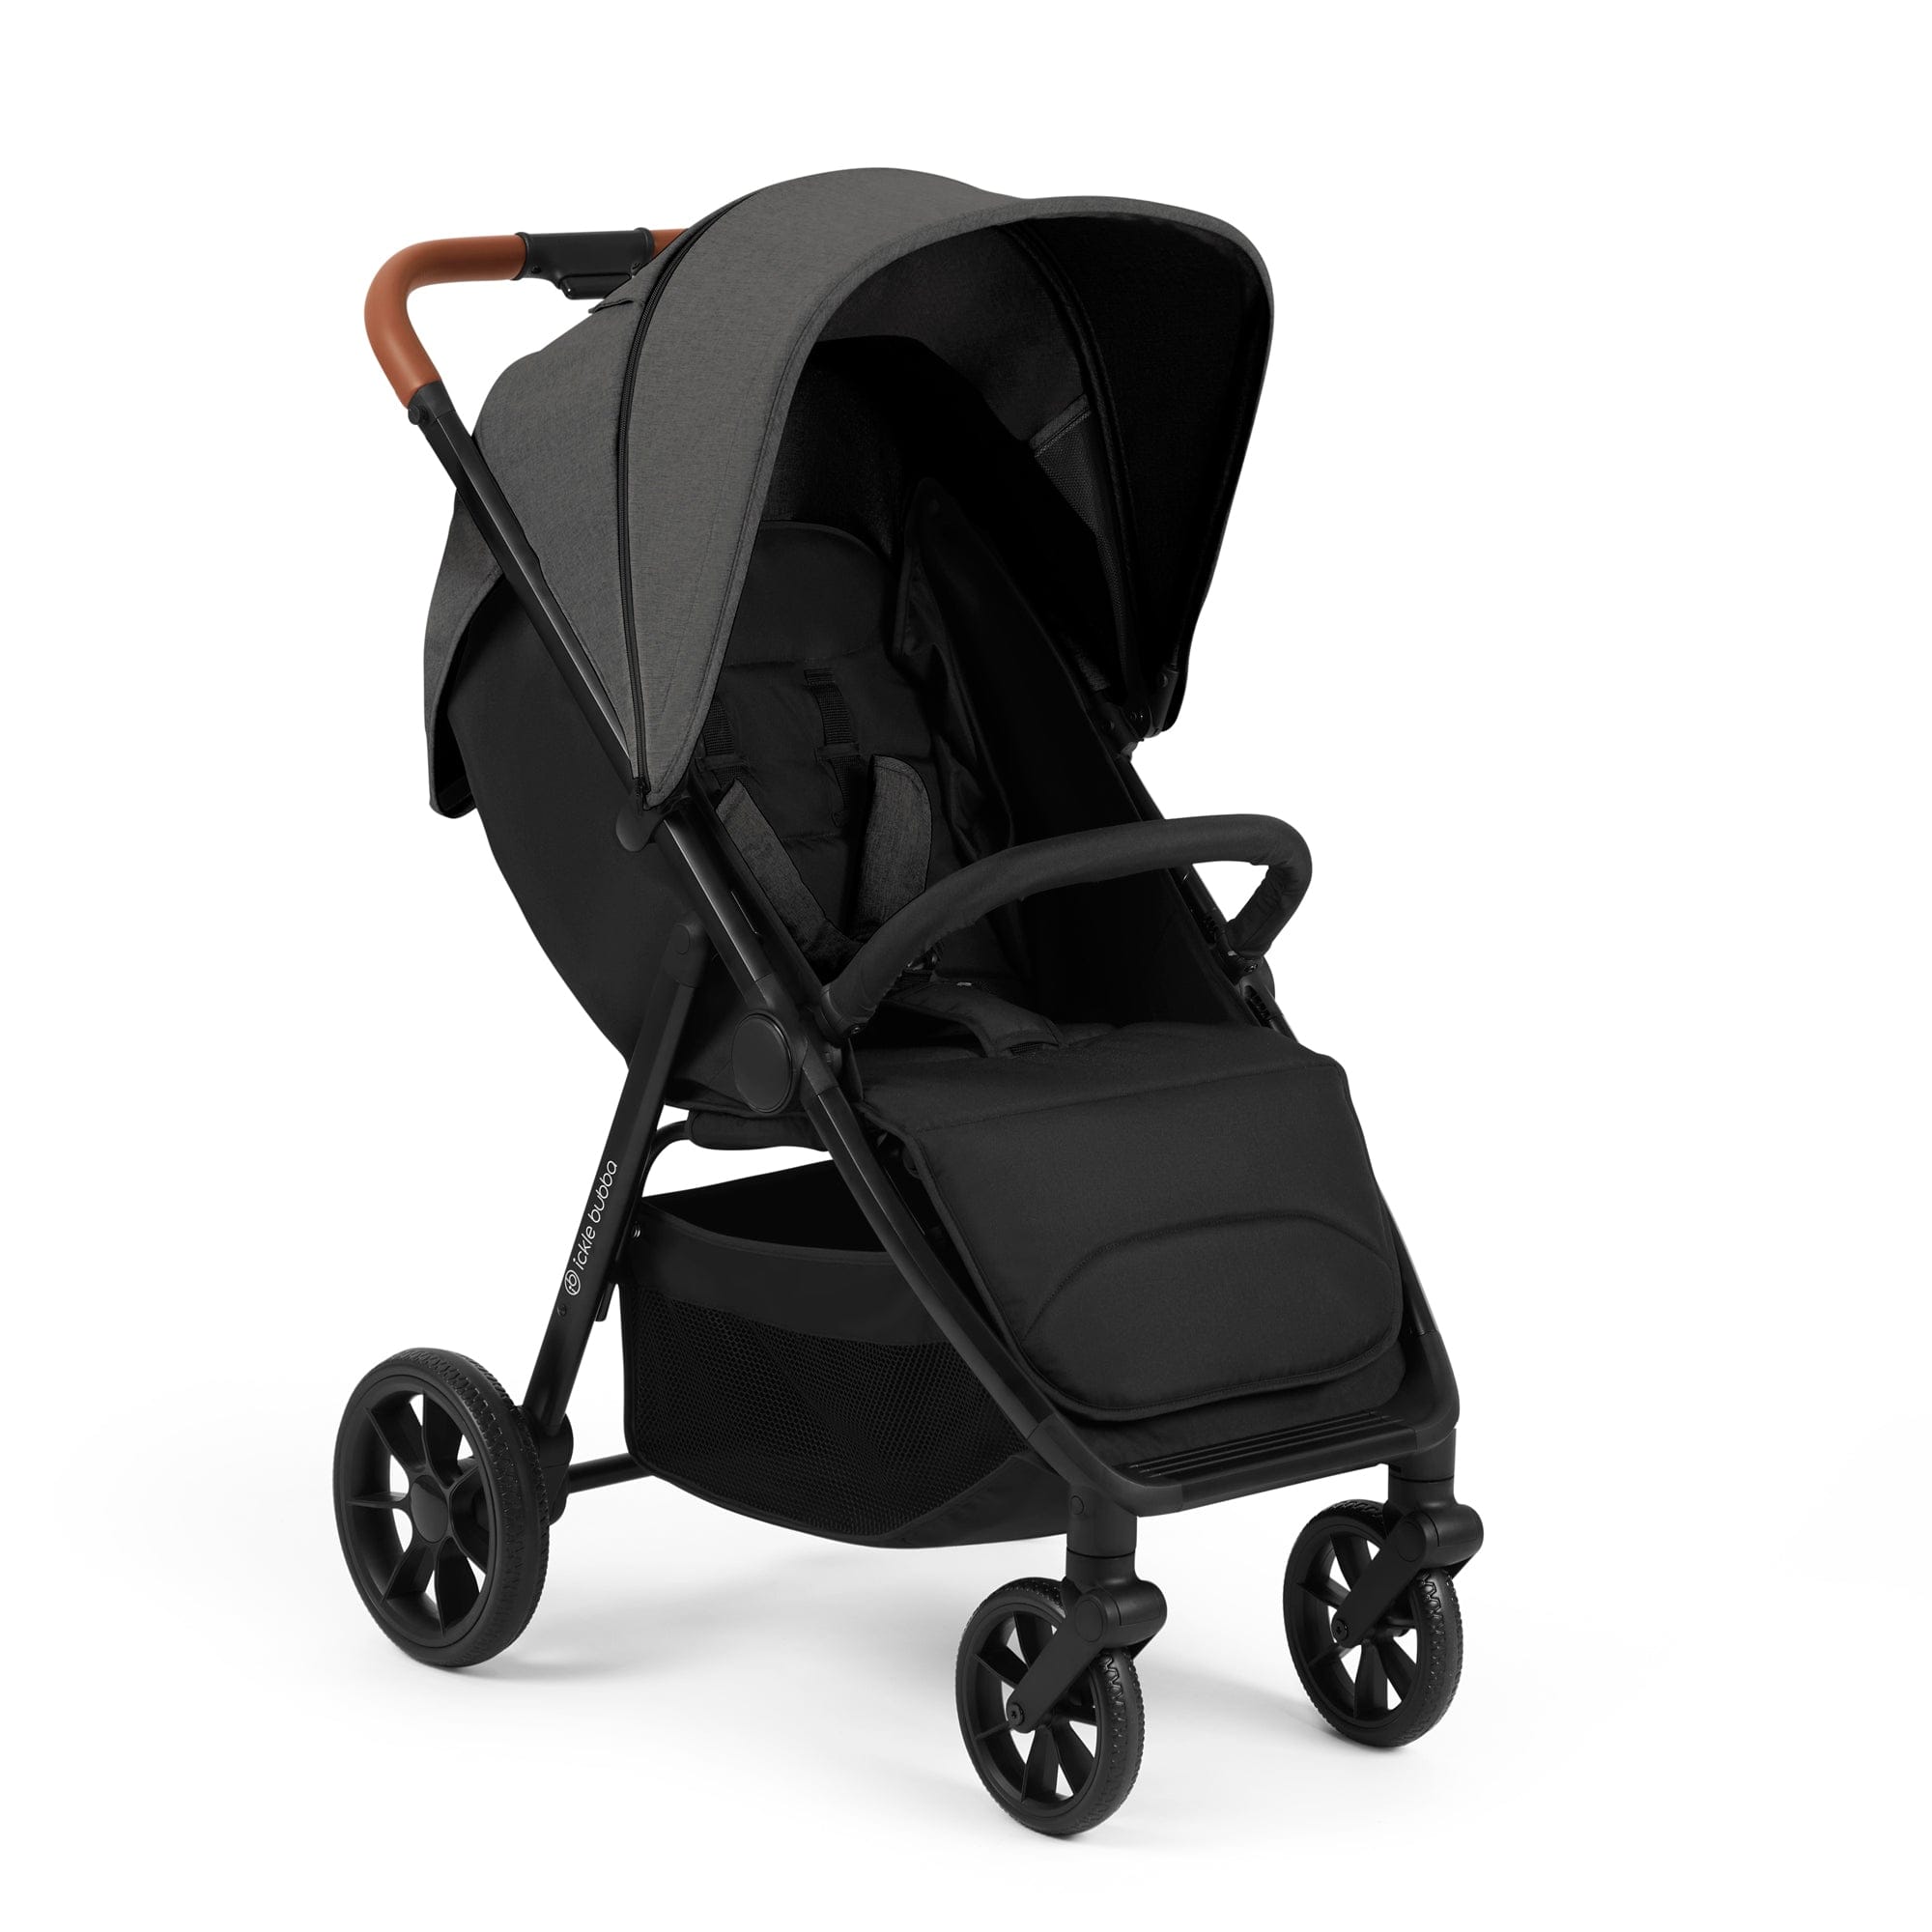 STOMP STRIDE STROLLER - CHARCOAL GREY Pushchairs & Buggies 15-006-100-148 5056515033823